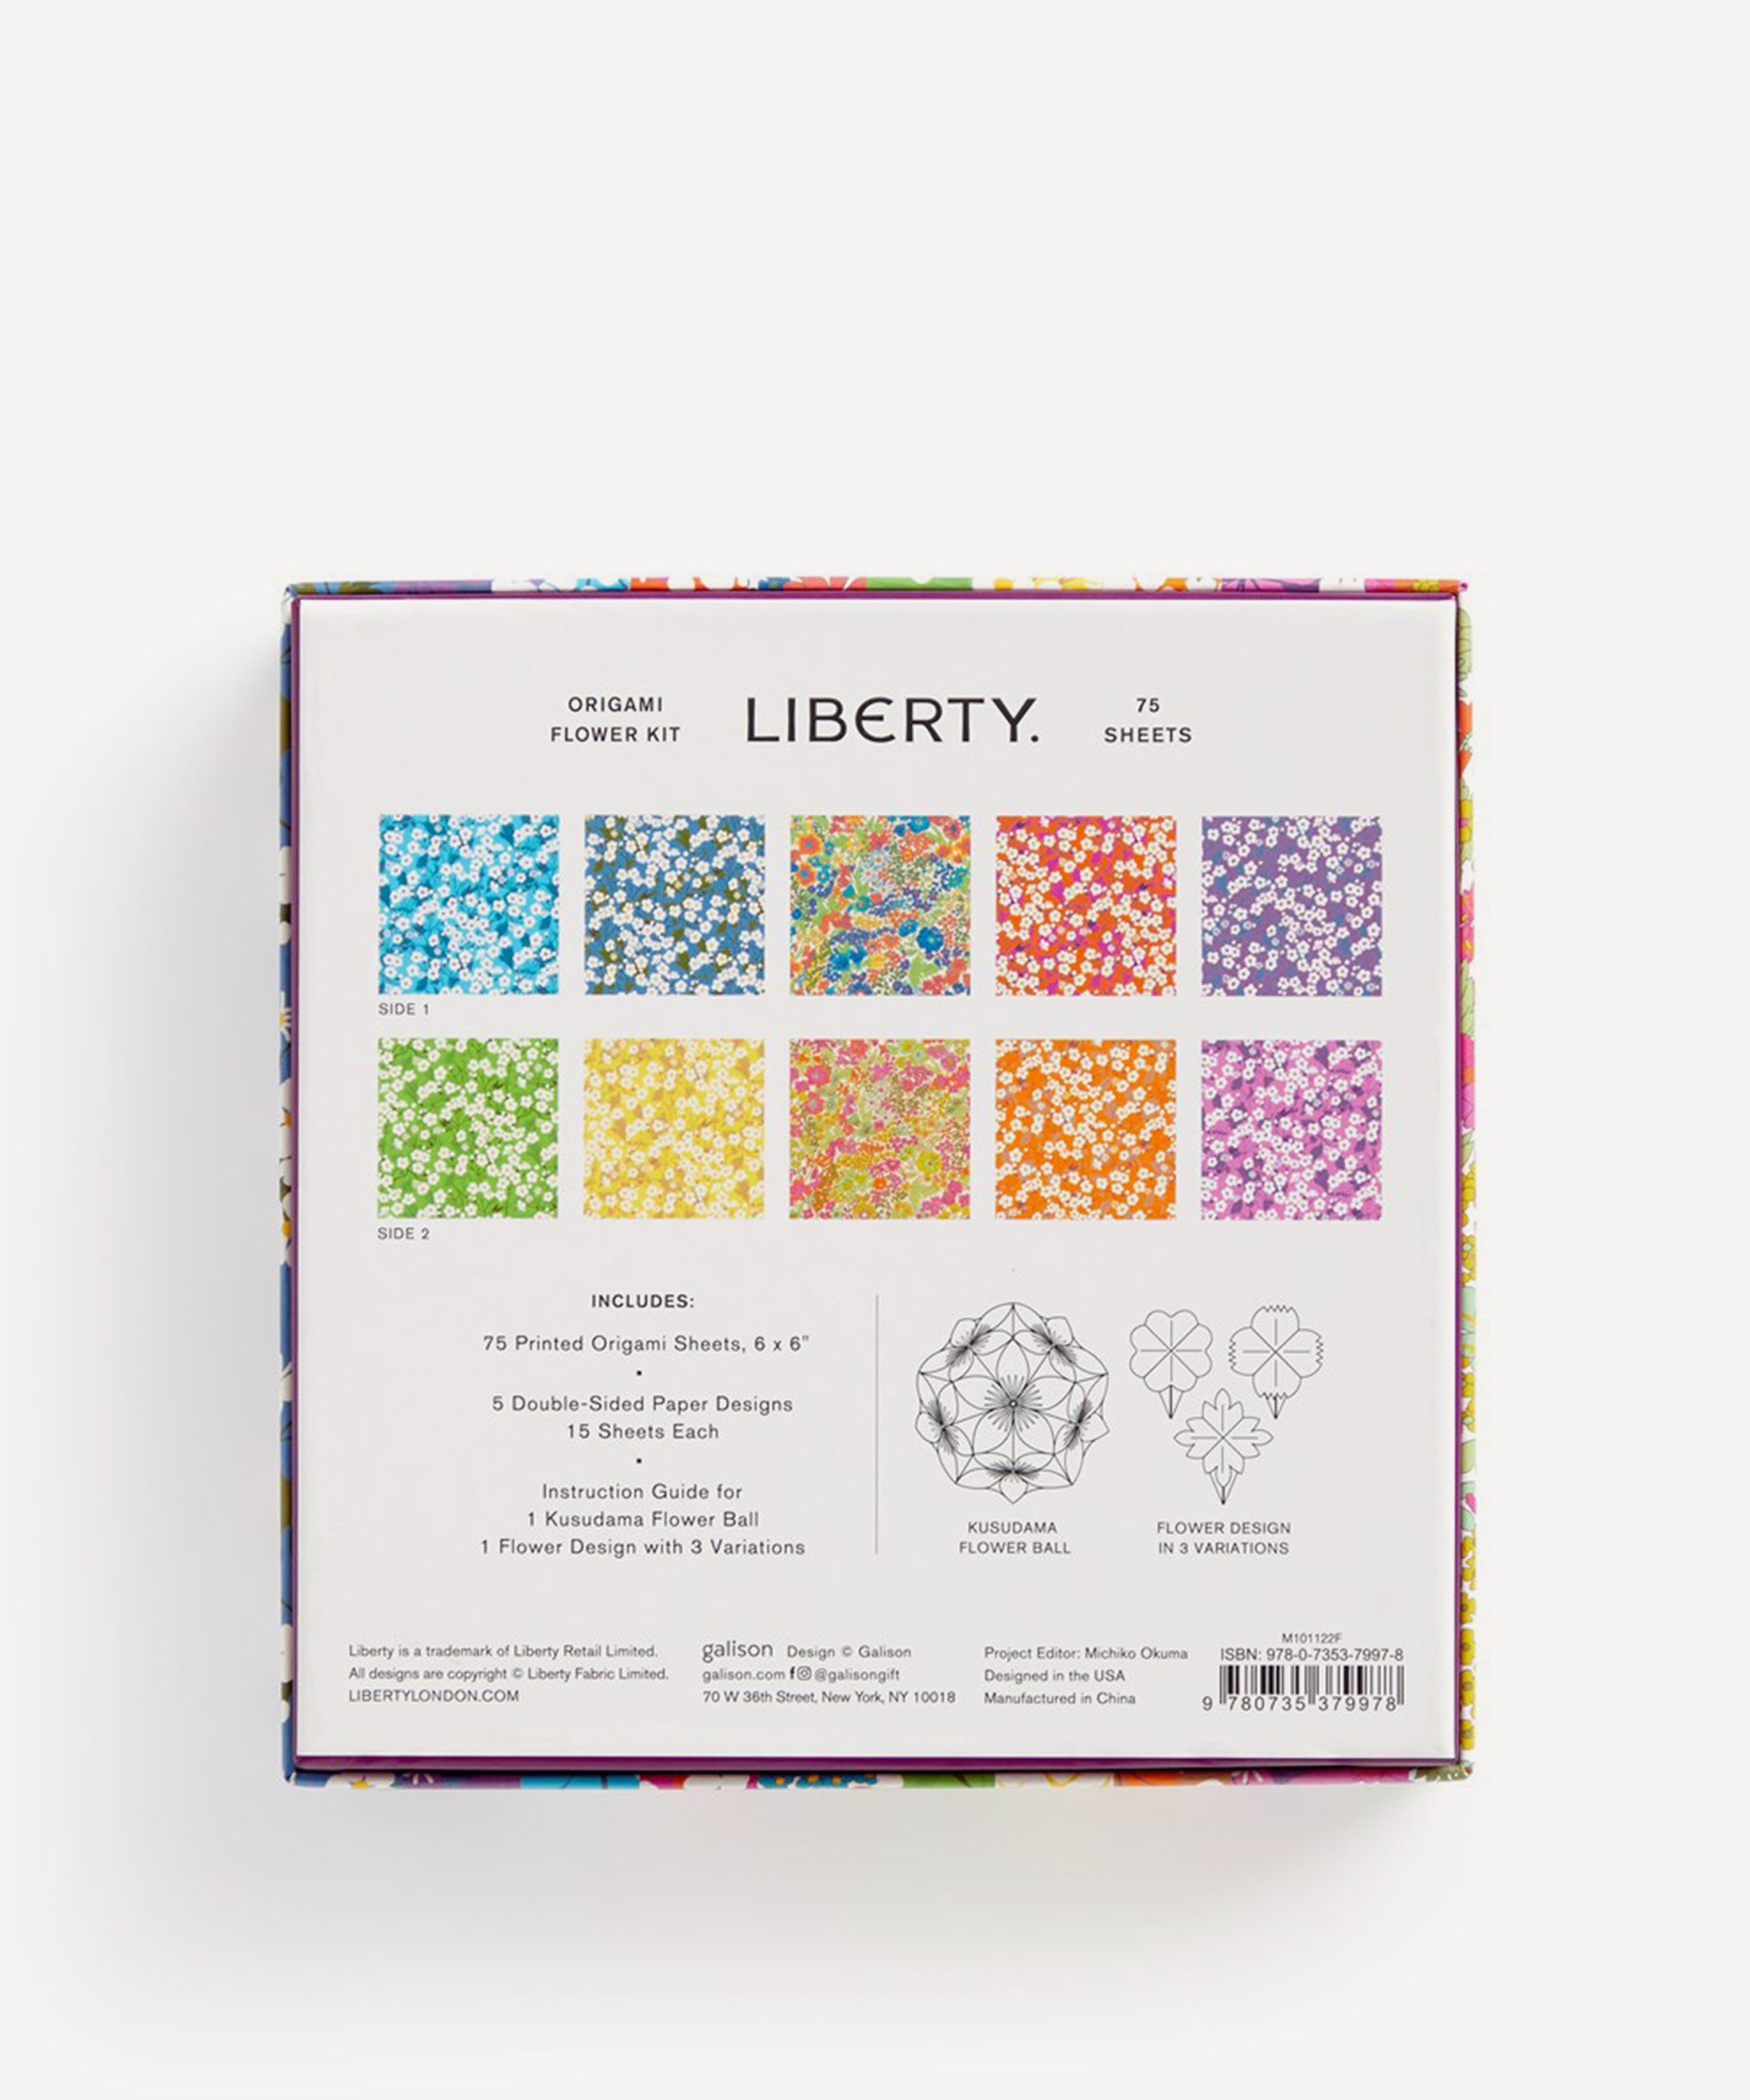 Liberty Classic Floral Origami Flower Kit - SFMOMA Museum Store